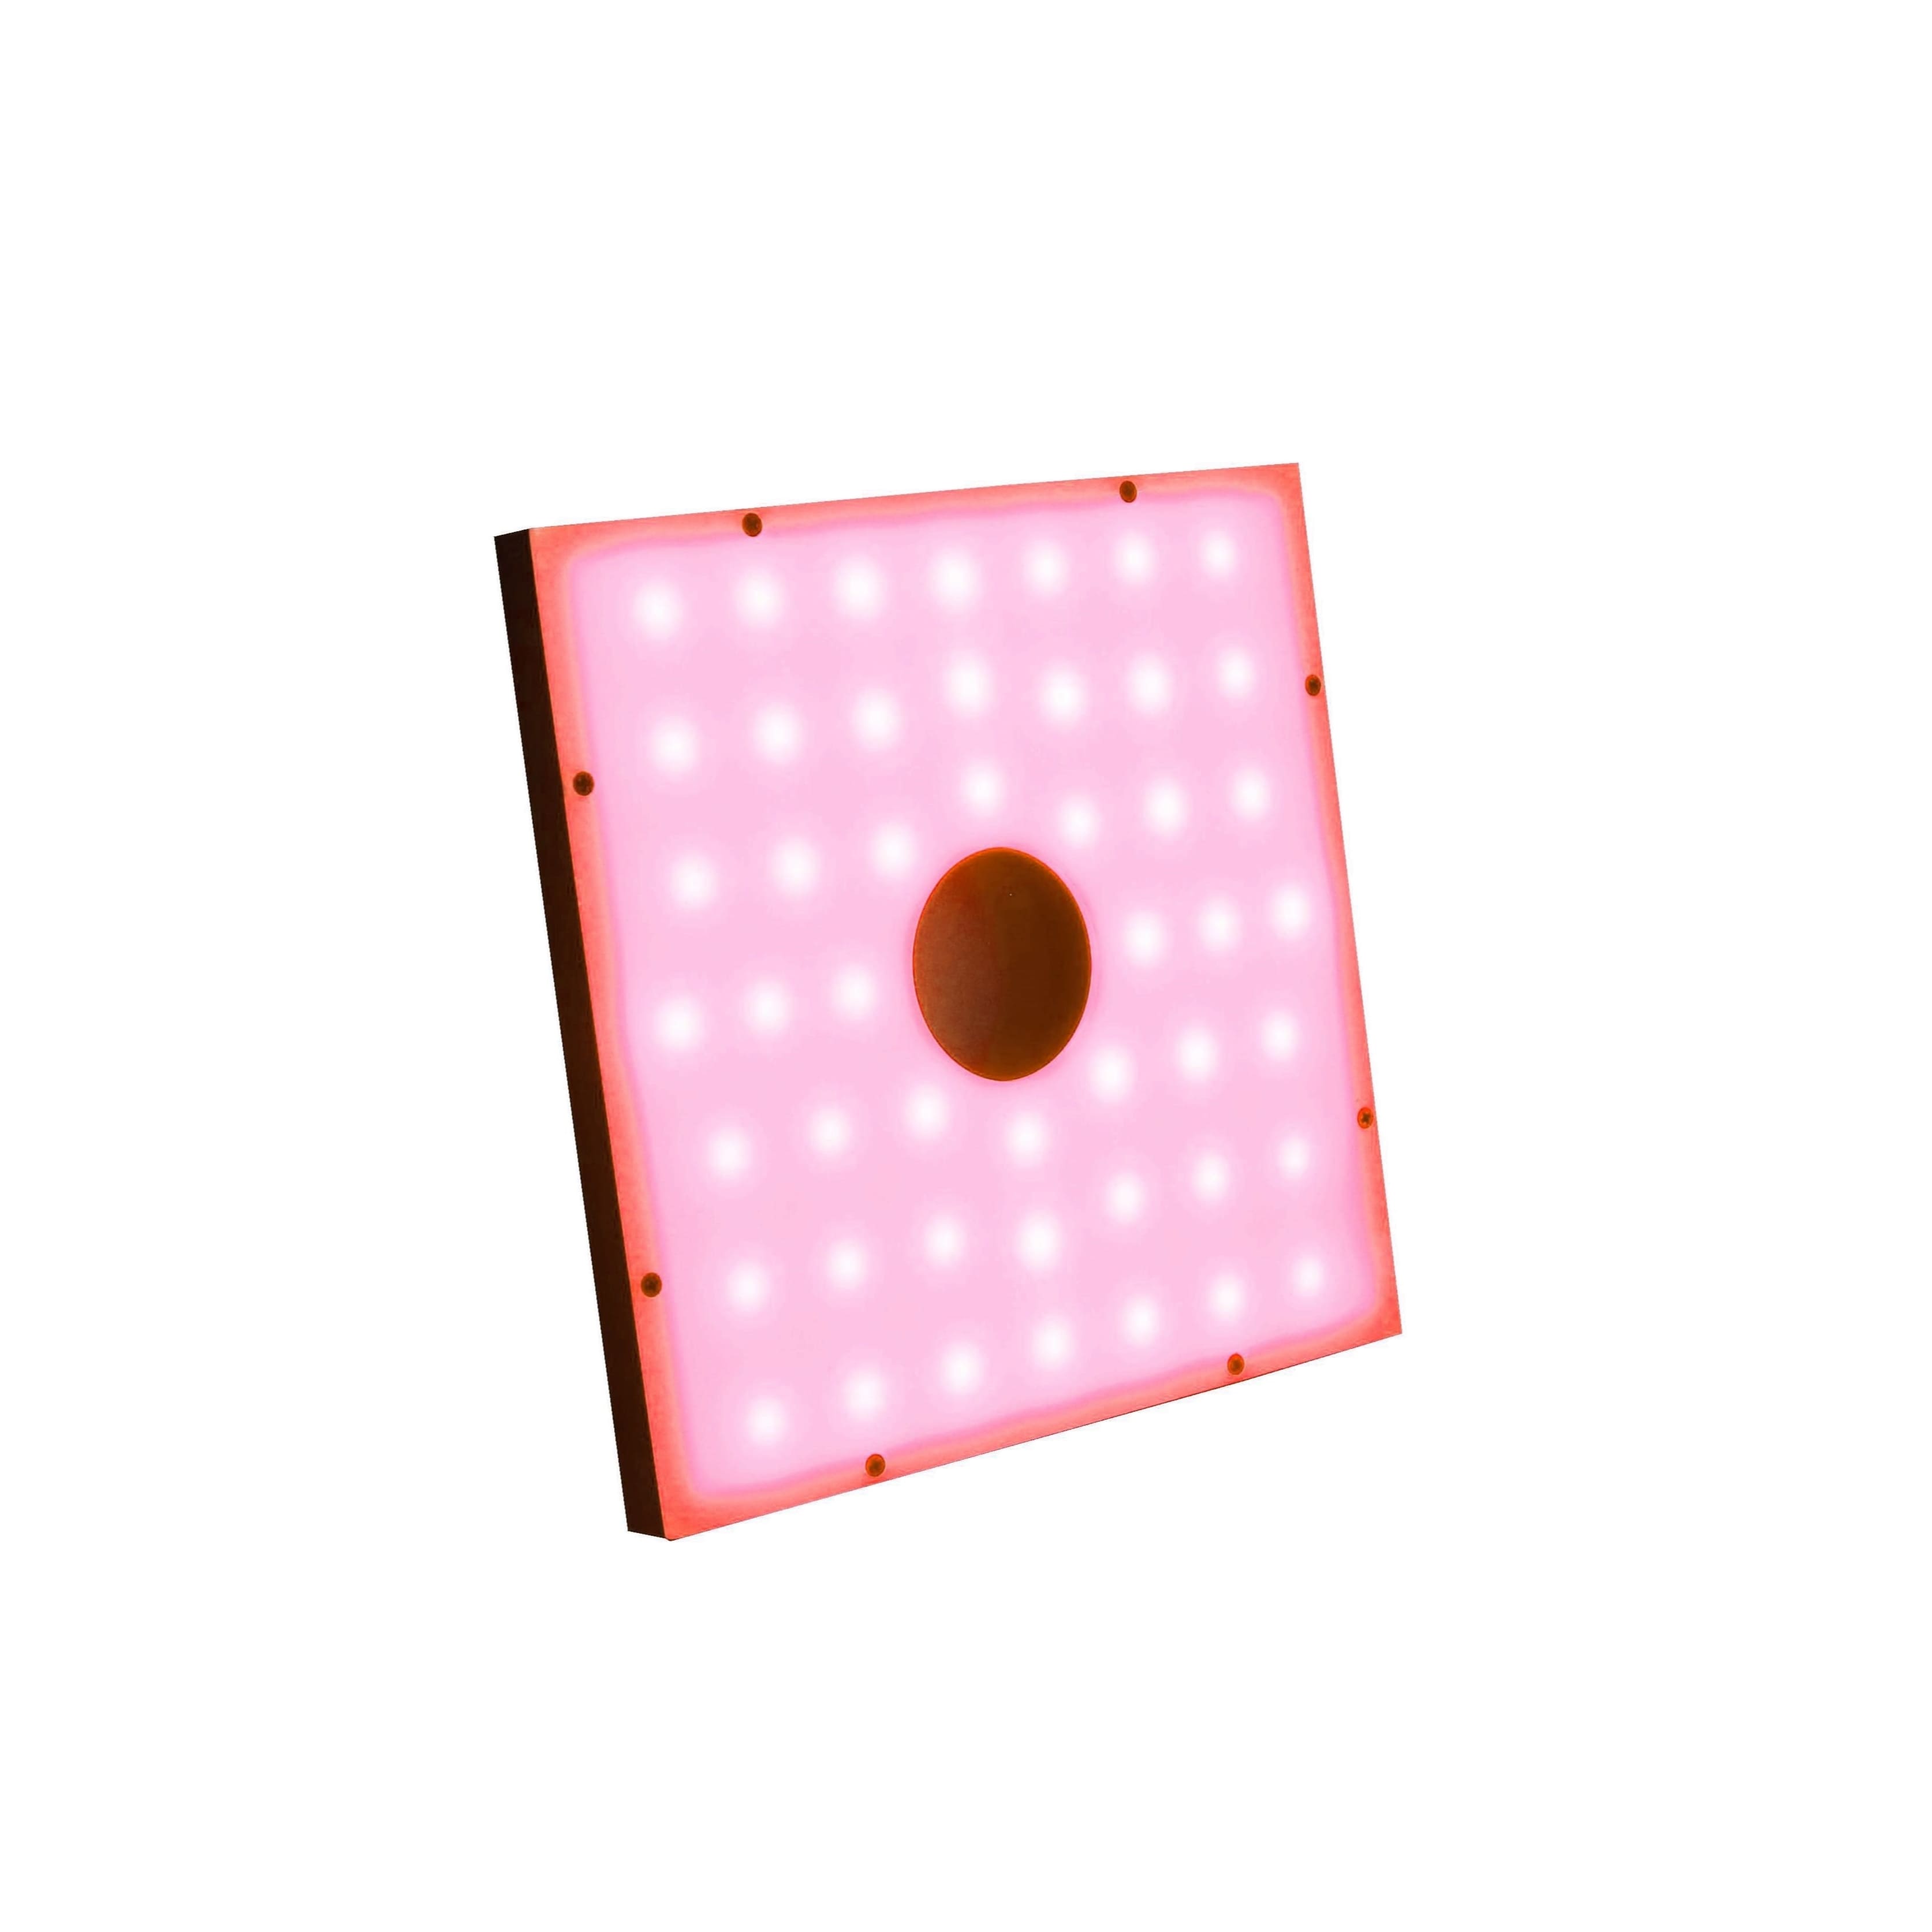 DSQ2-300/300 Diffused Square Panel Lights – Red